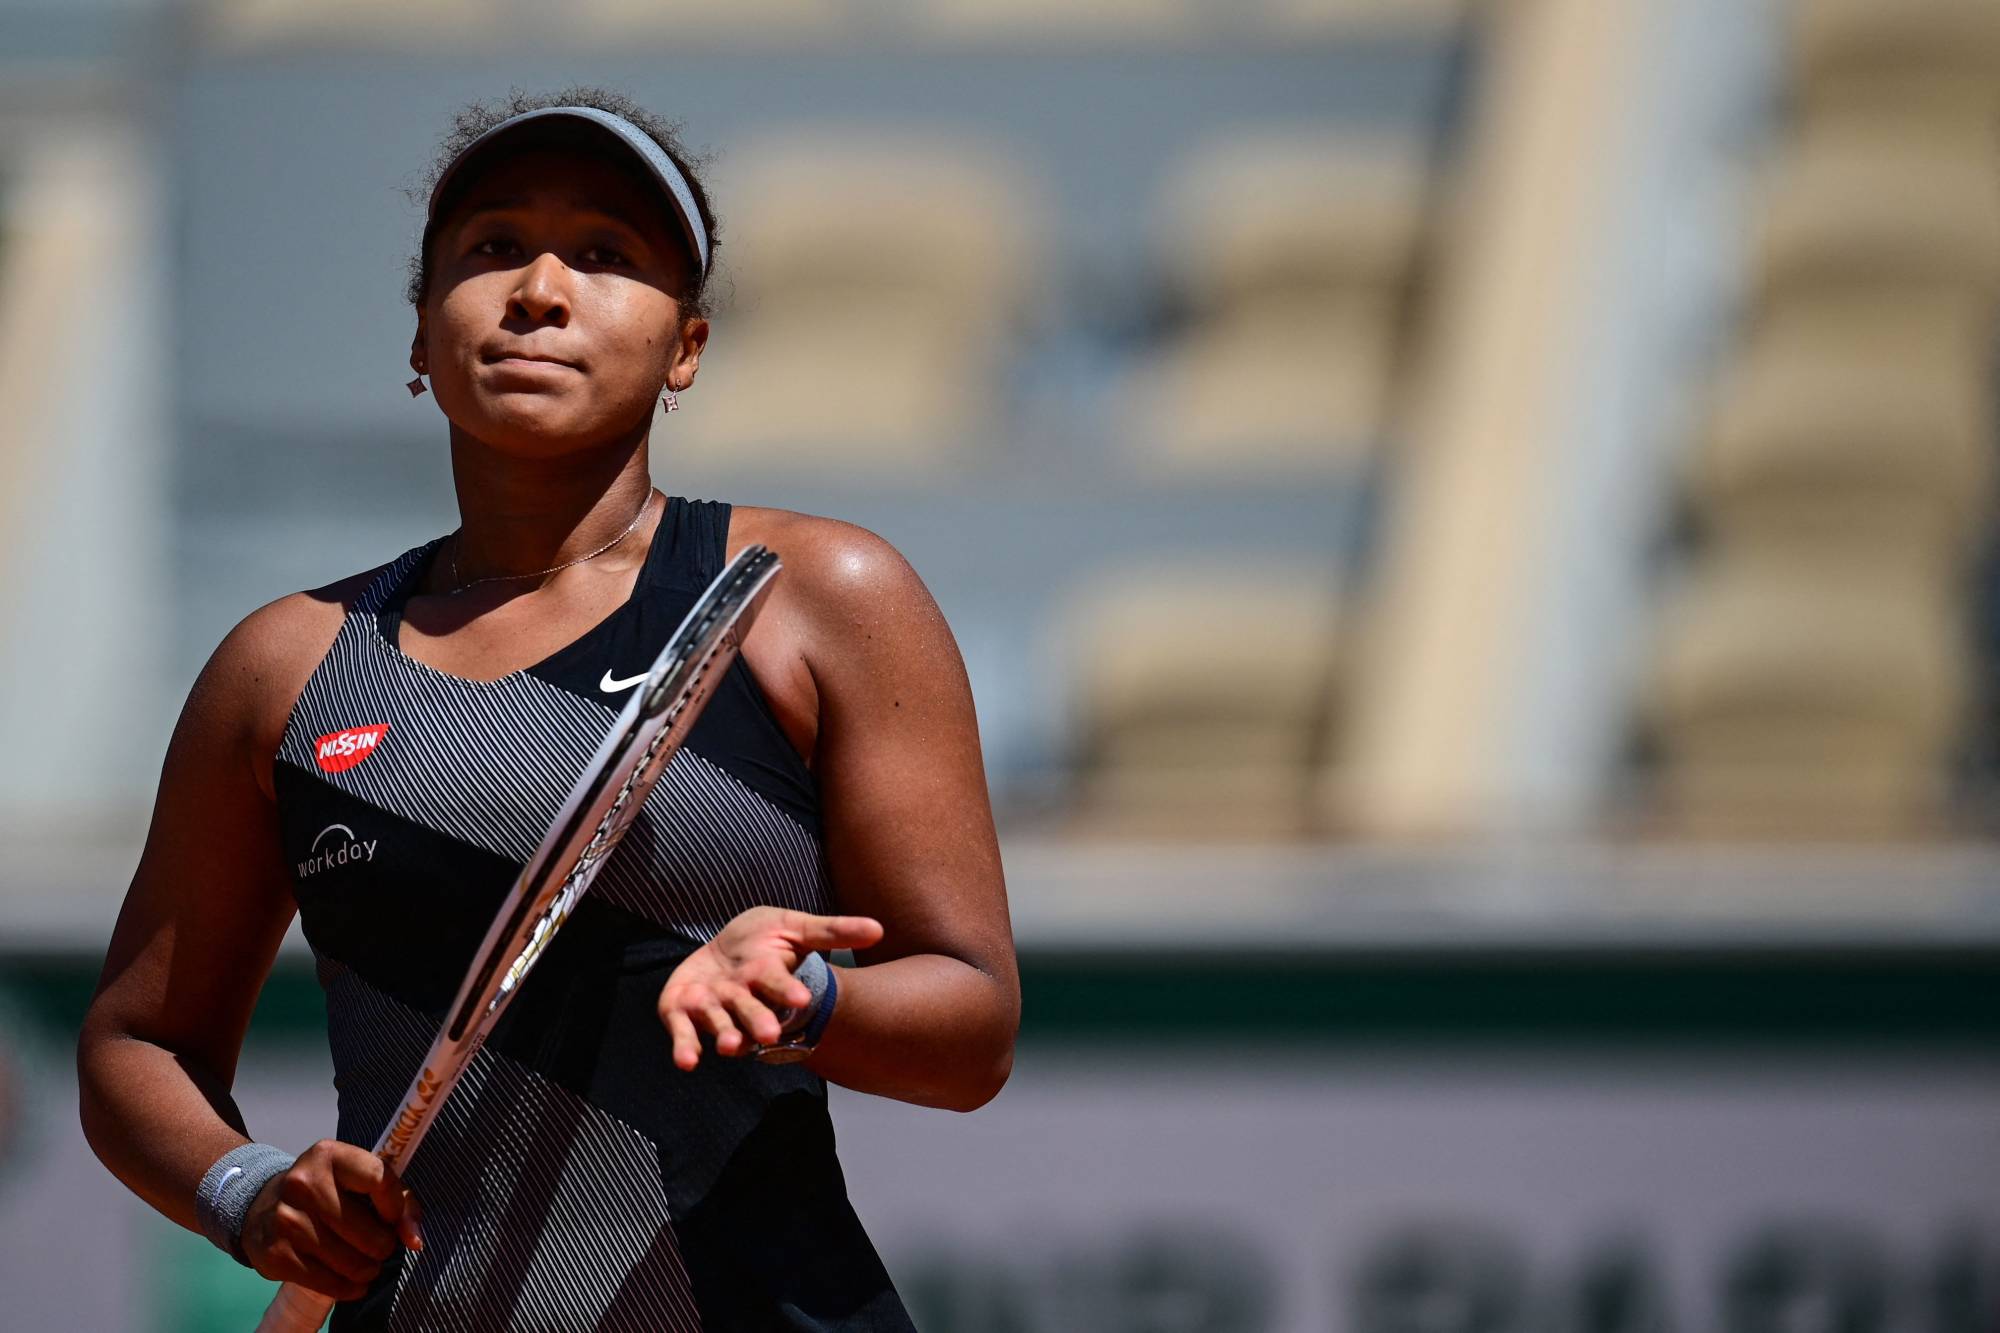 Naomi Osaka celebrates after winning against Romania's Patricia Maria Tig on Day 1 of the French Open in Paris. | AFP-JIJI